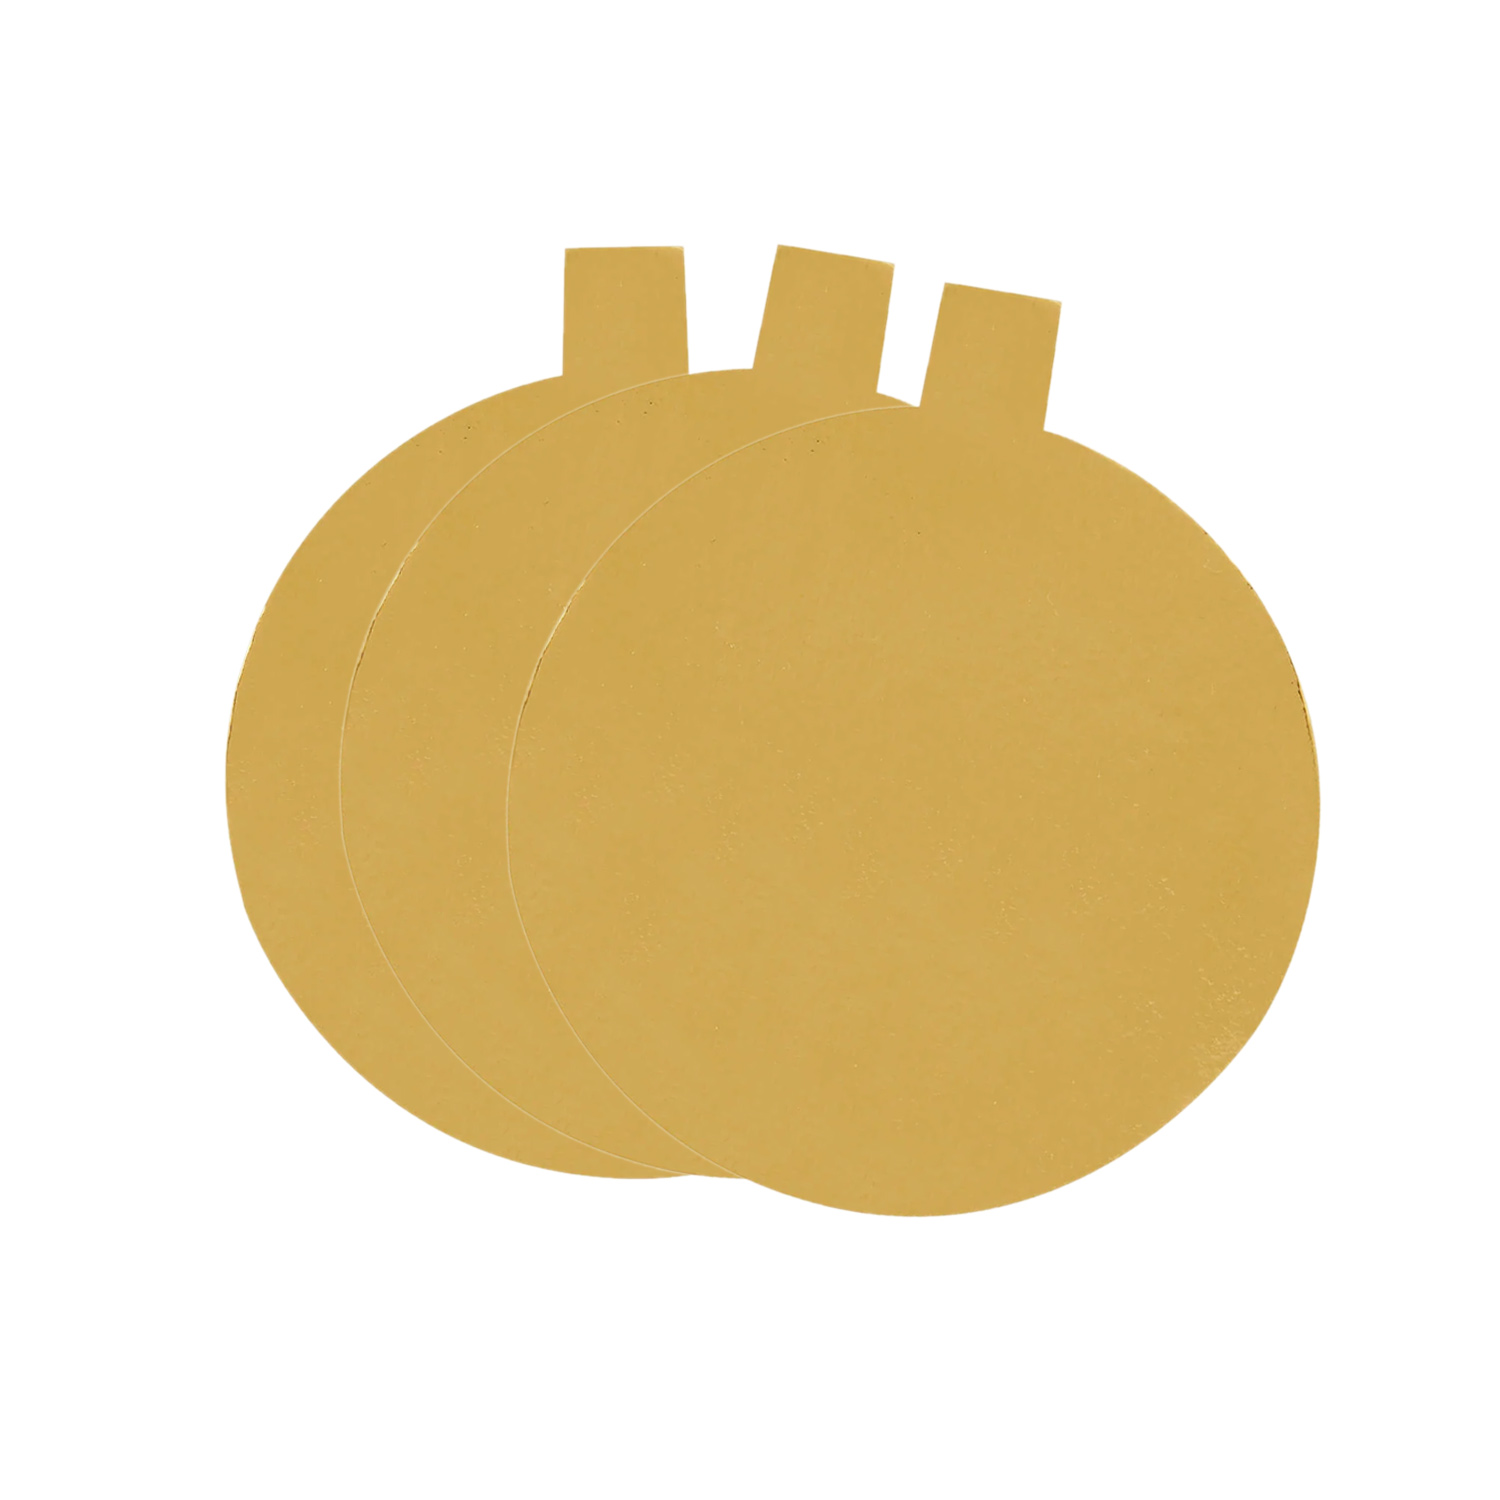 Cake Board with handle (8.5cm), Gold Colour Round Shape